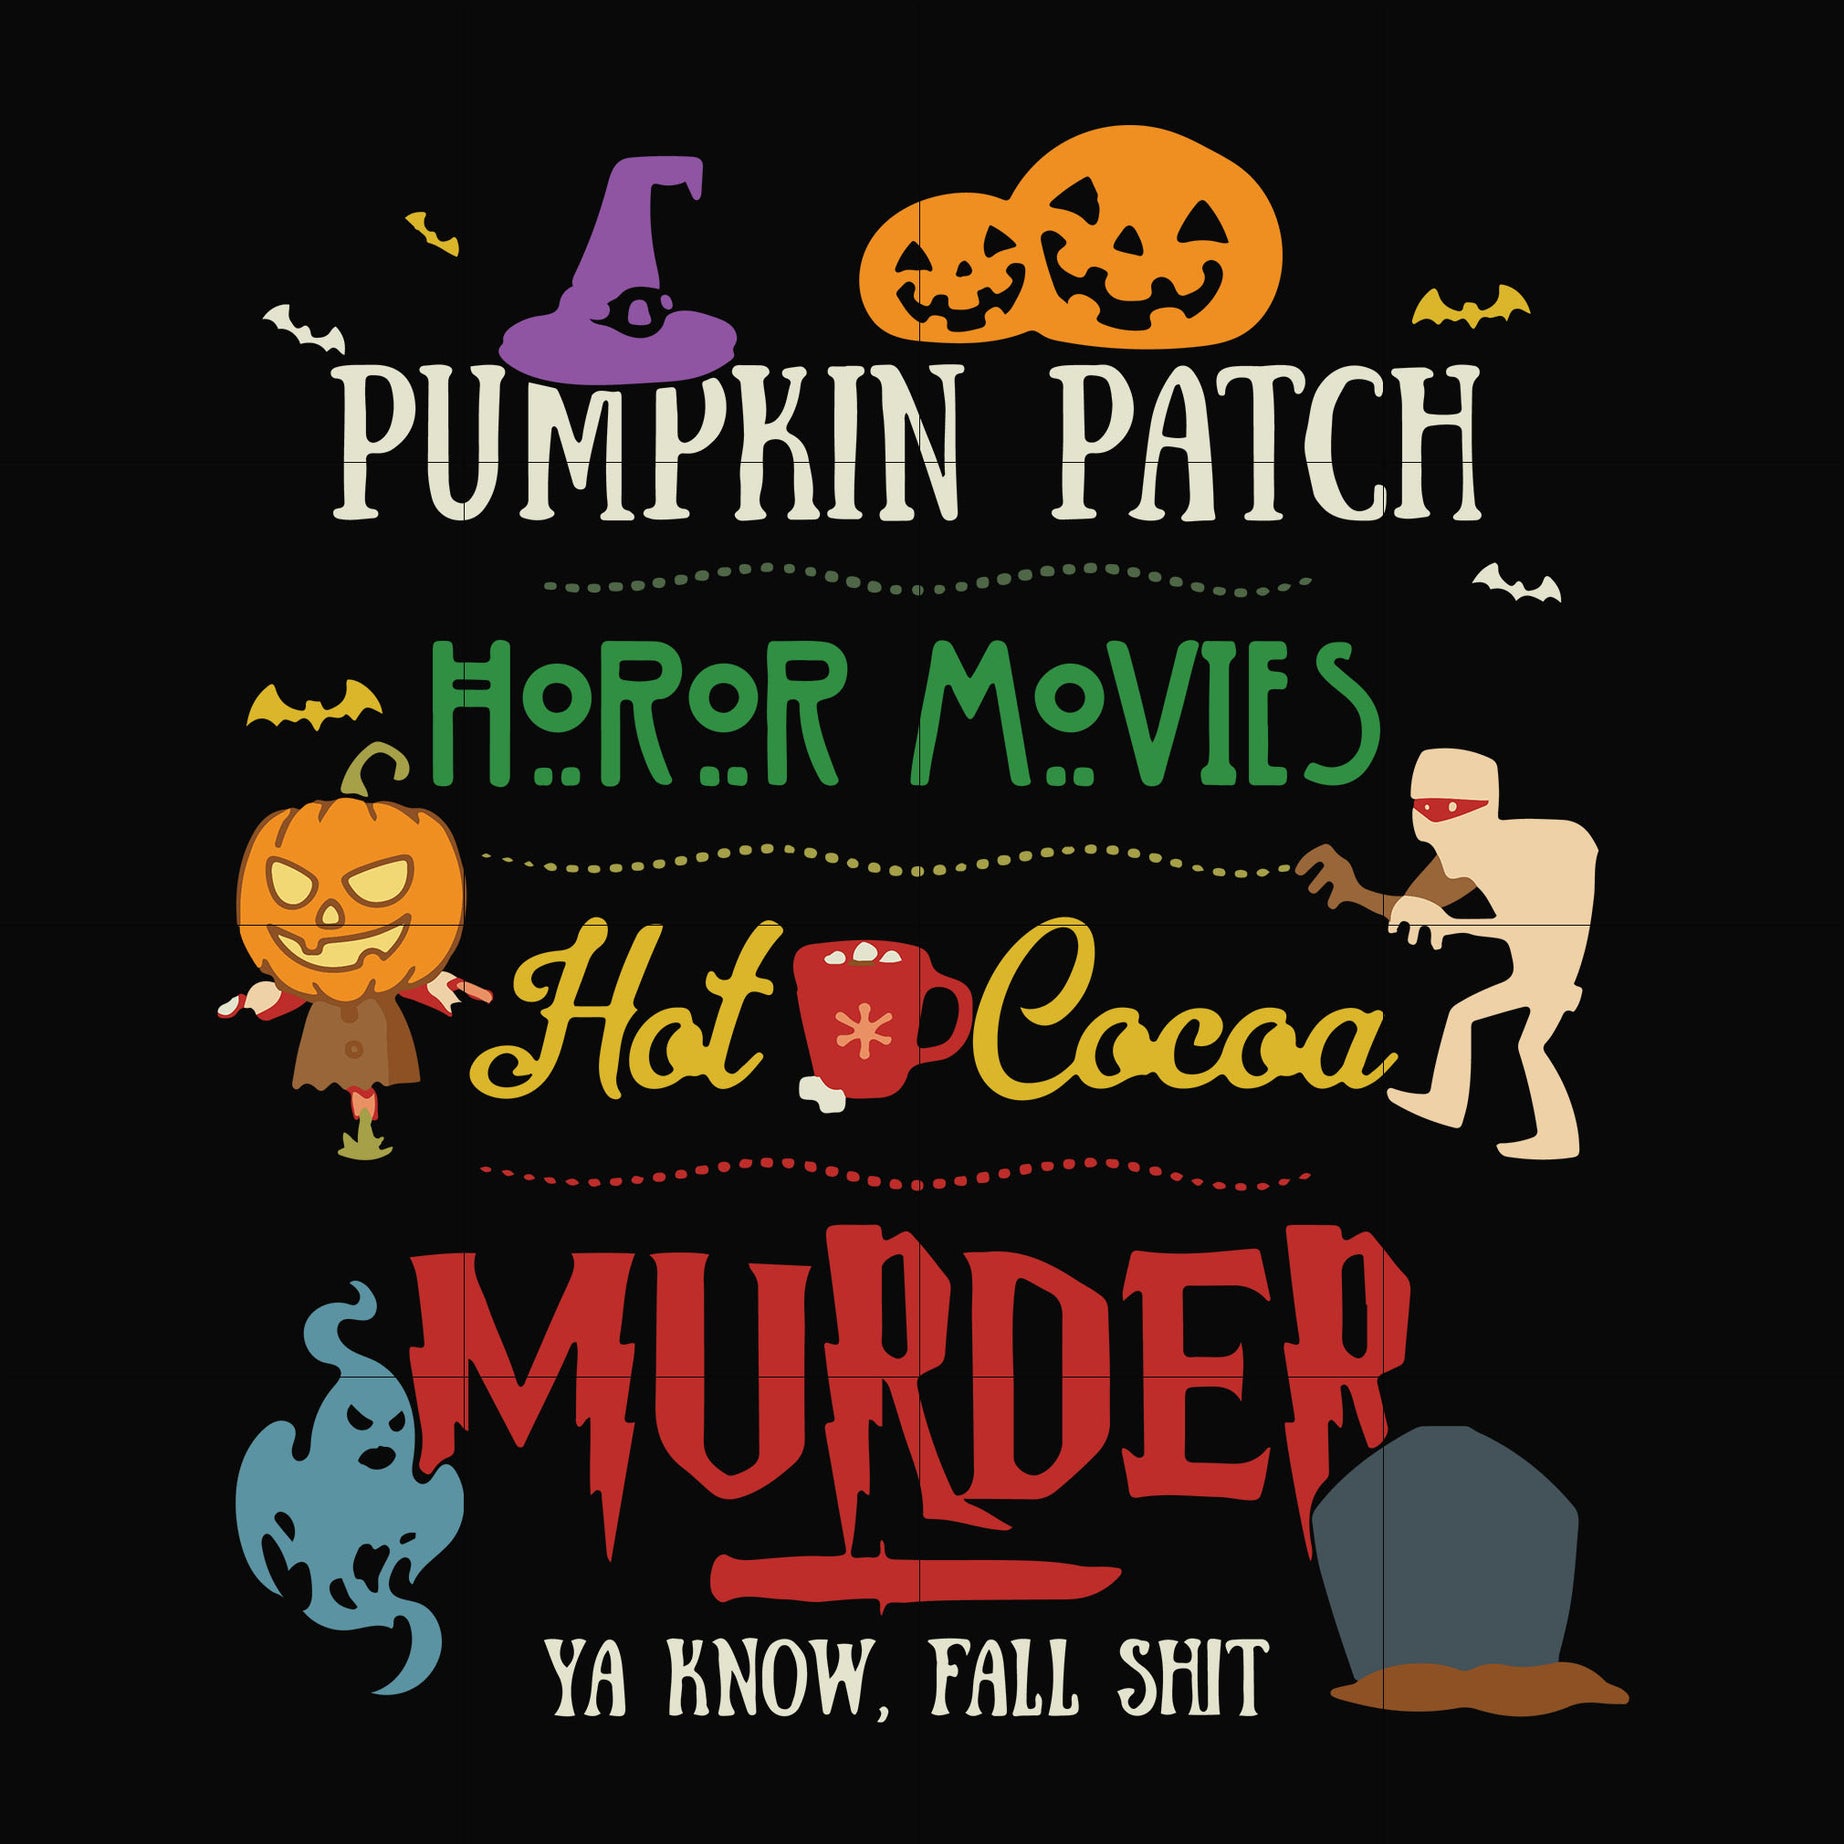 Pumpkin patch horror movies hot cocoa murder ya know, yall shit svg, halloween svg, png, dxf, eps digital file HWL24072030